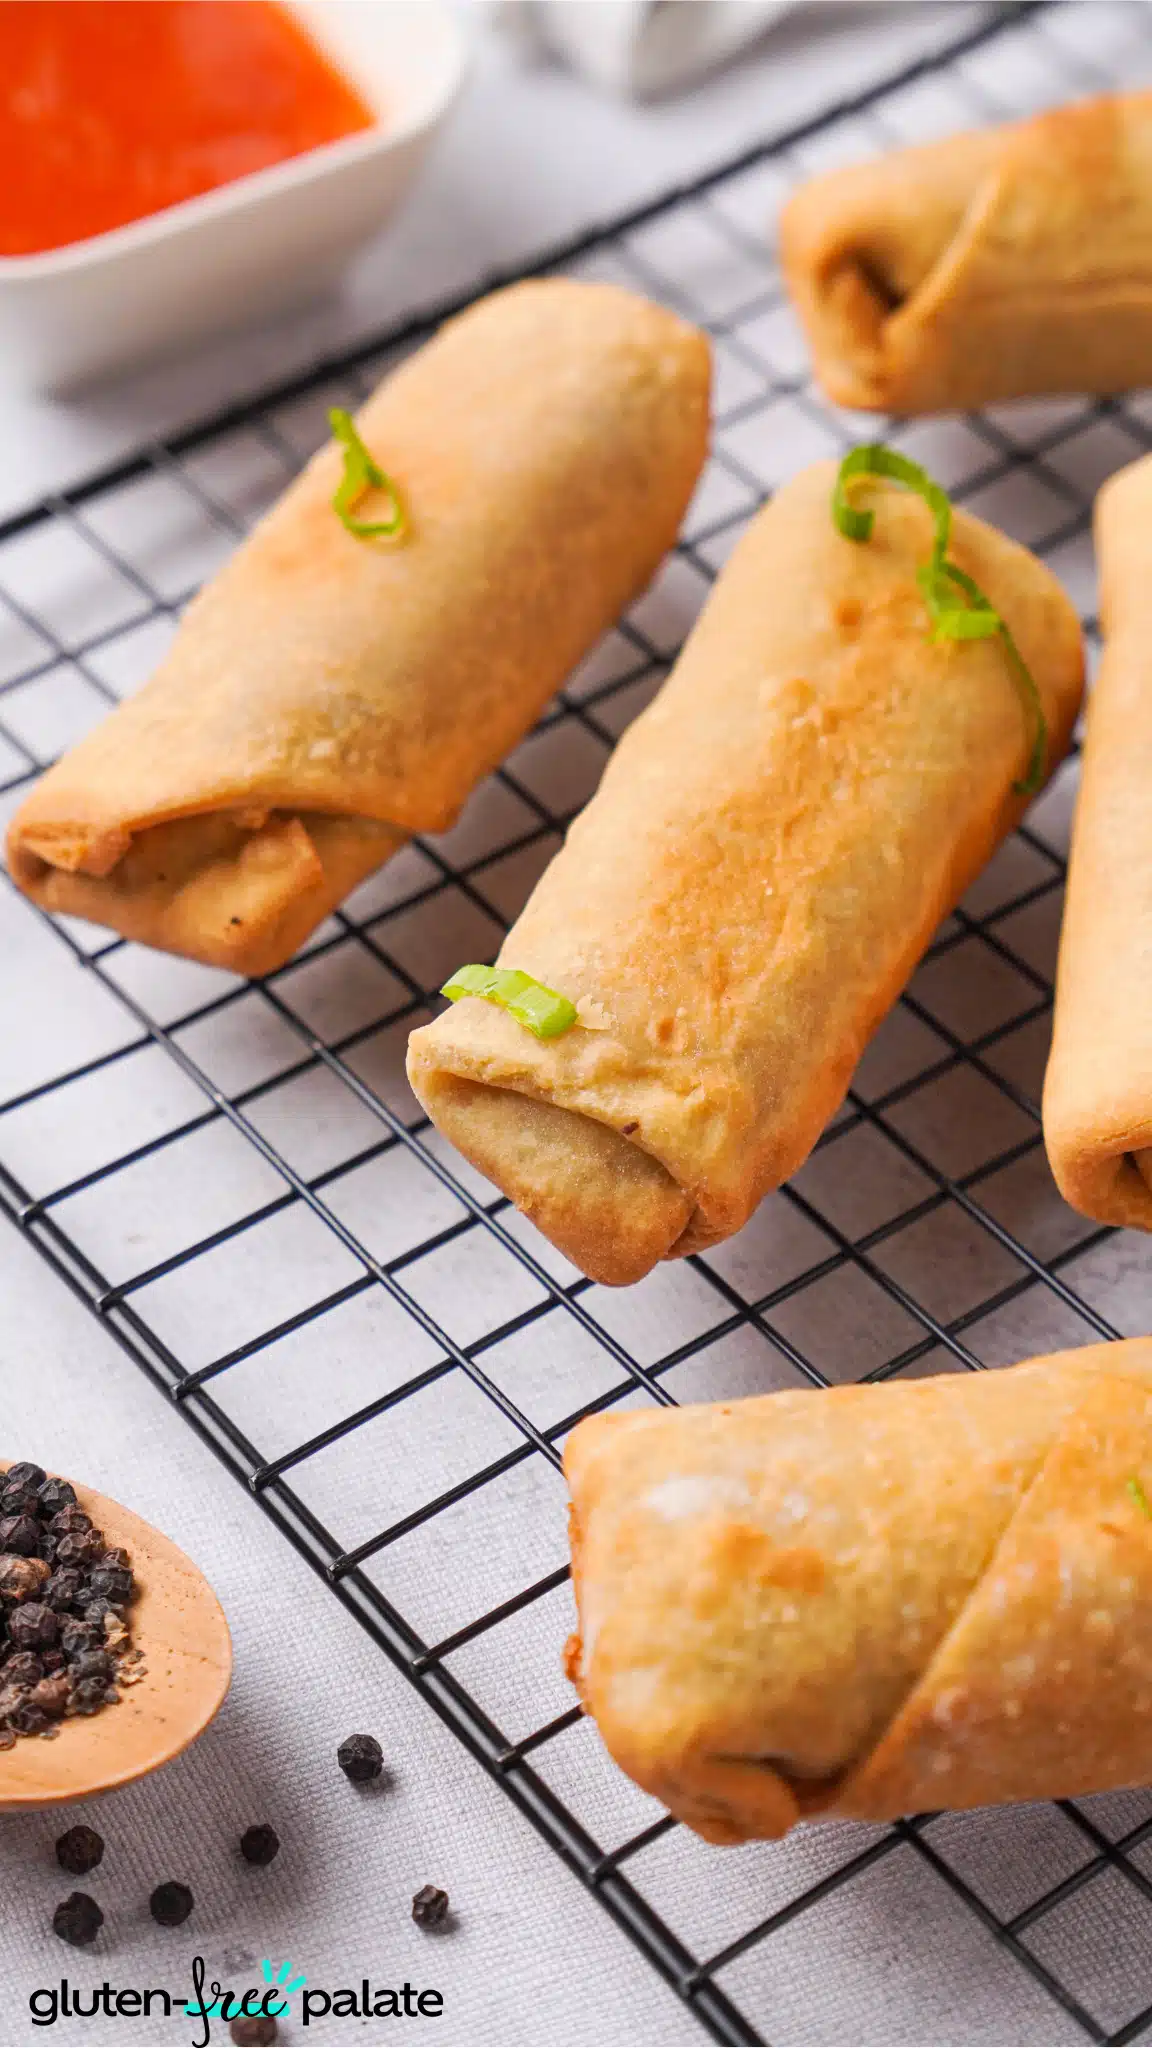 How To Make Gluten-Free Spring Roll Wrappers